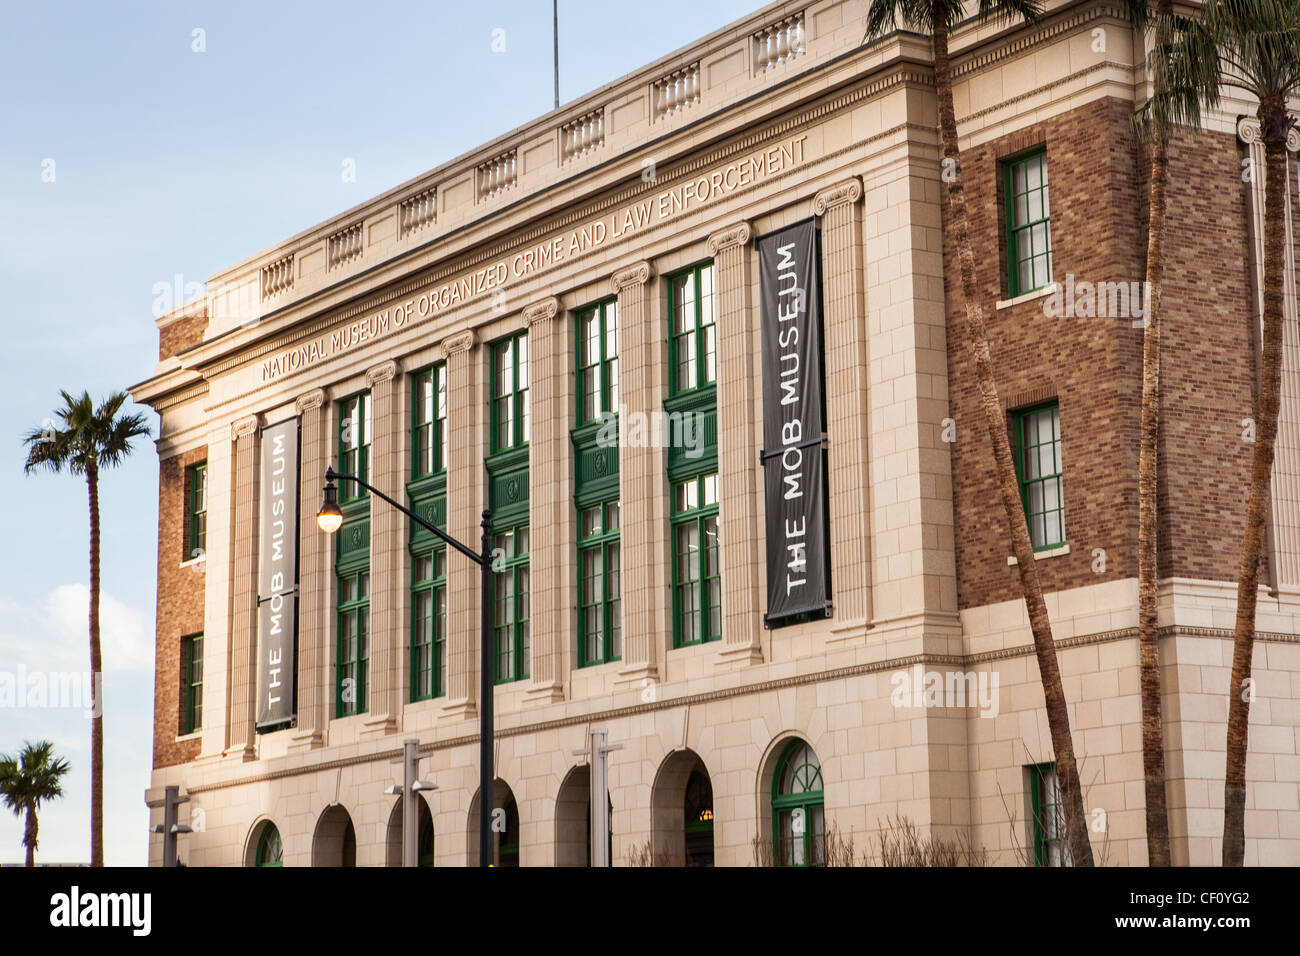 Exterior view of the Mob Museum opened in a former courthouse in Las Vegas on February 14, 2012. The $42 million dollar museum features exhibits on organized crime in America with emphasis on their role in Las Vegas. Stock Photo